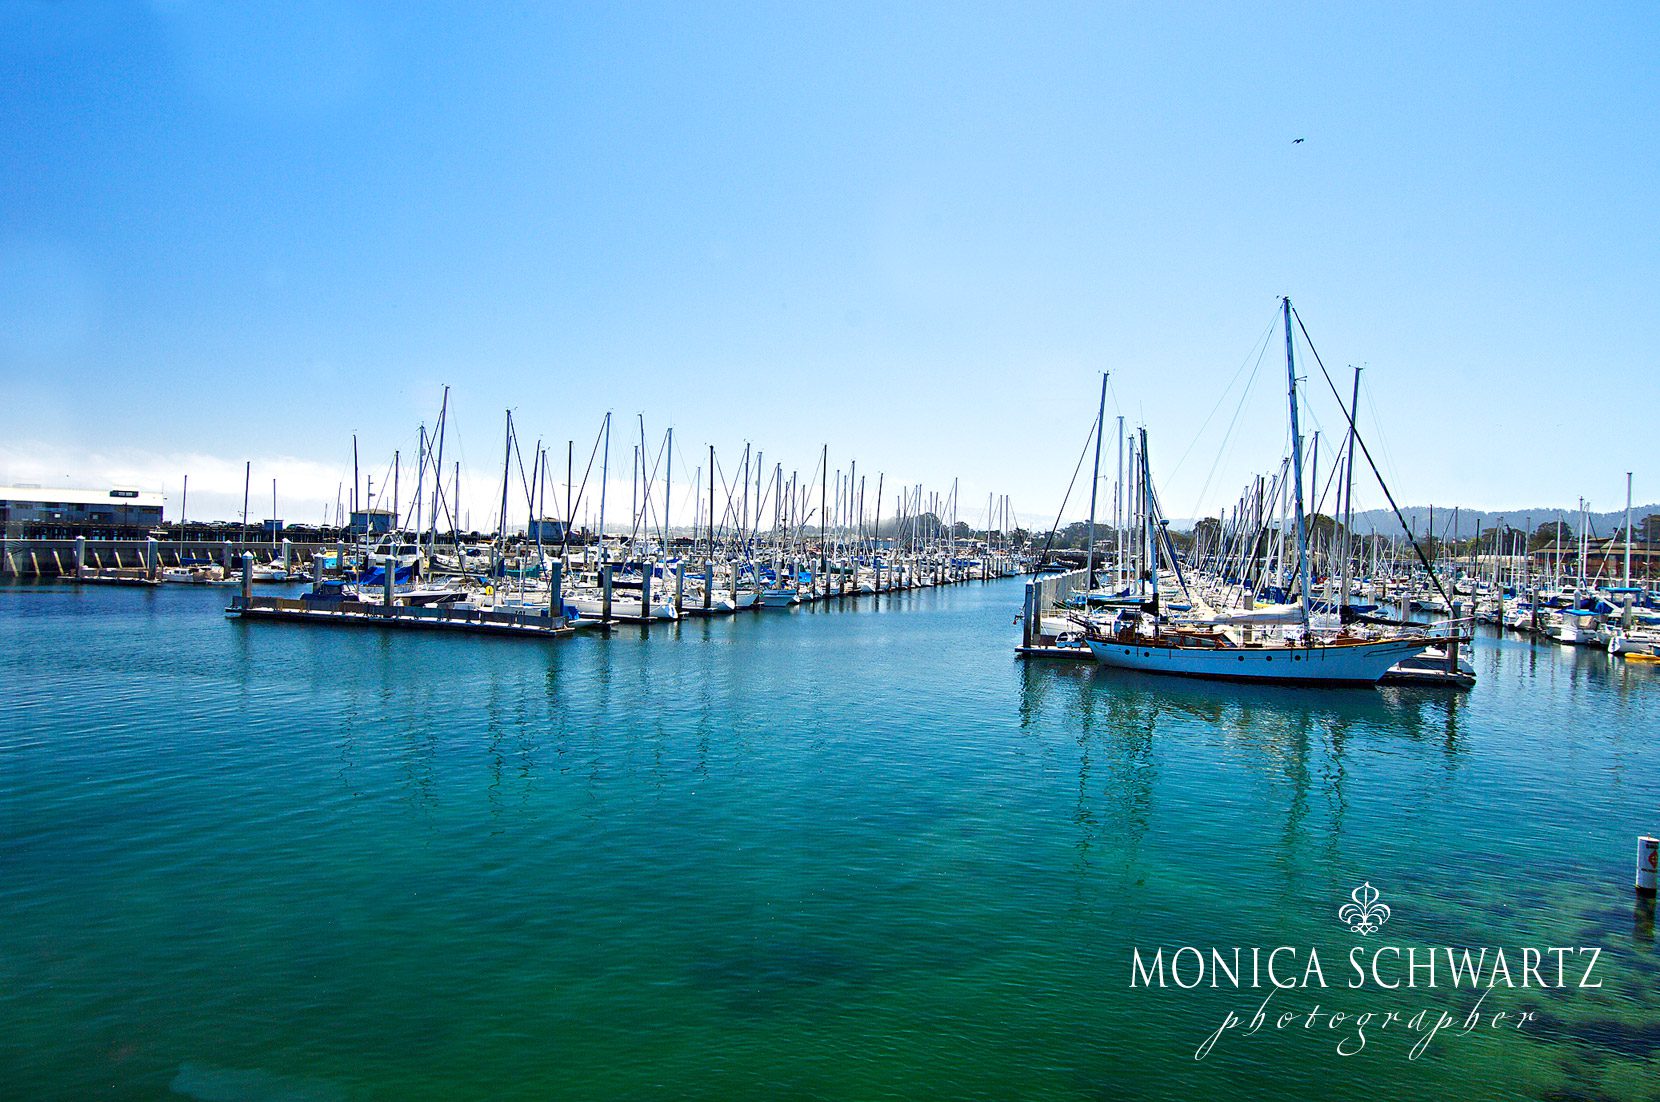 View-on-the-marina-from-Scales-Restaurant-at-Fishermans-Wharf-in-Monterey-California